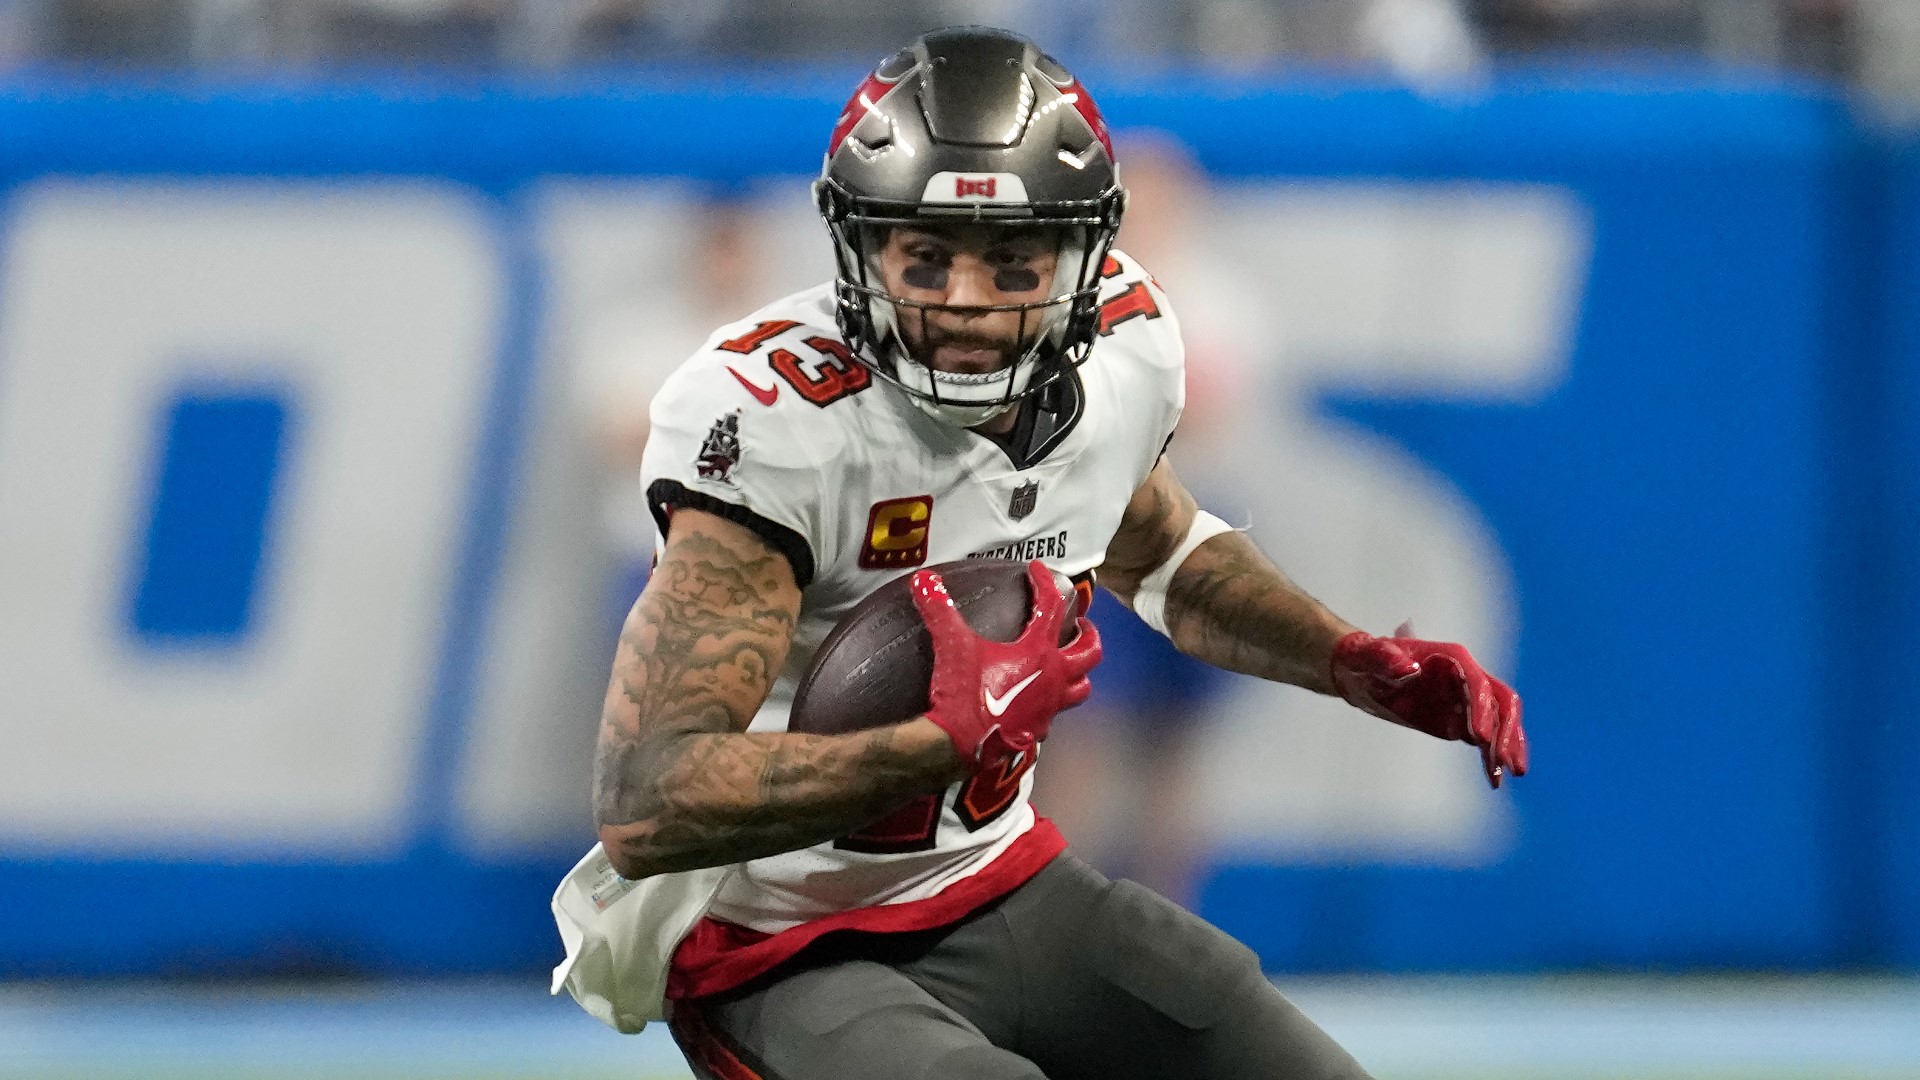 Buccaneers wide receiver Mike Evans spoke with 10 Tampa Bay sports director Evan Closky after the team re-signed him Friday, March 8.